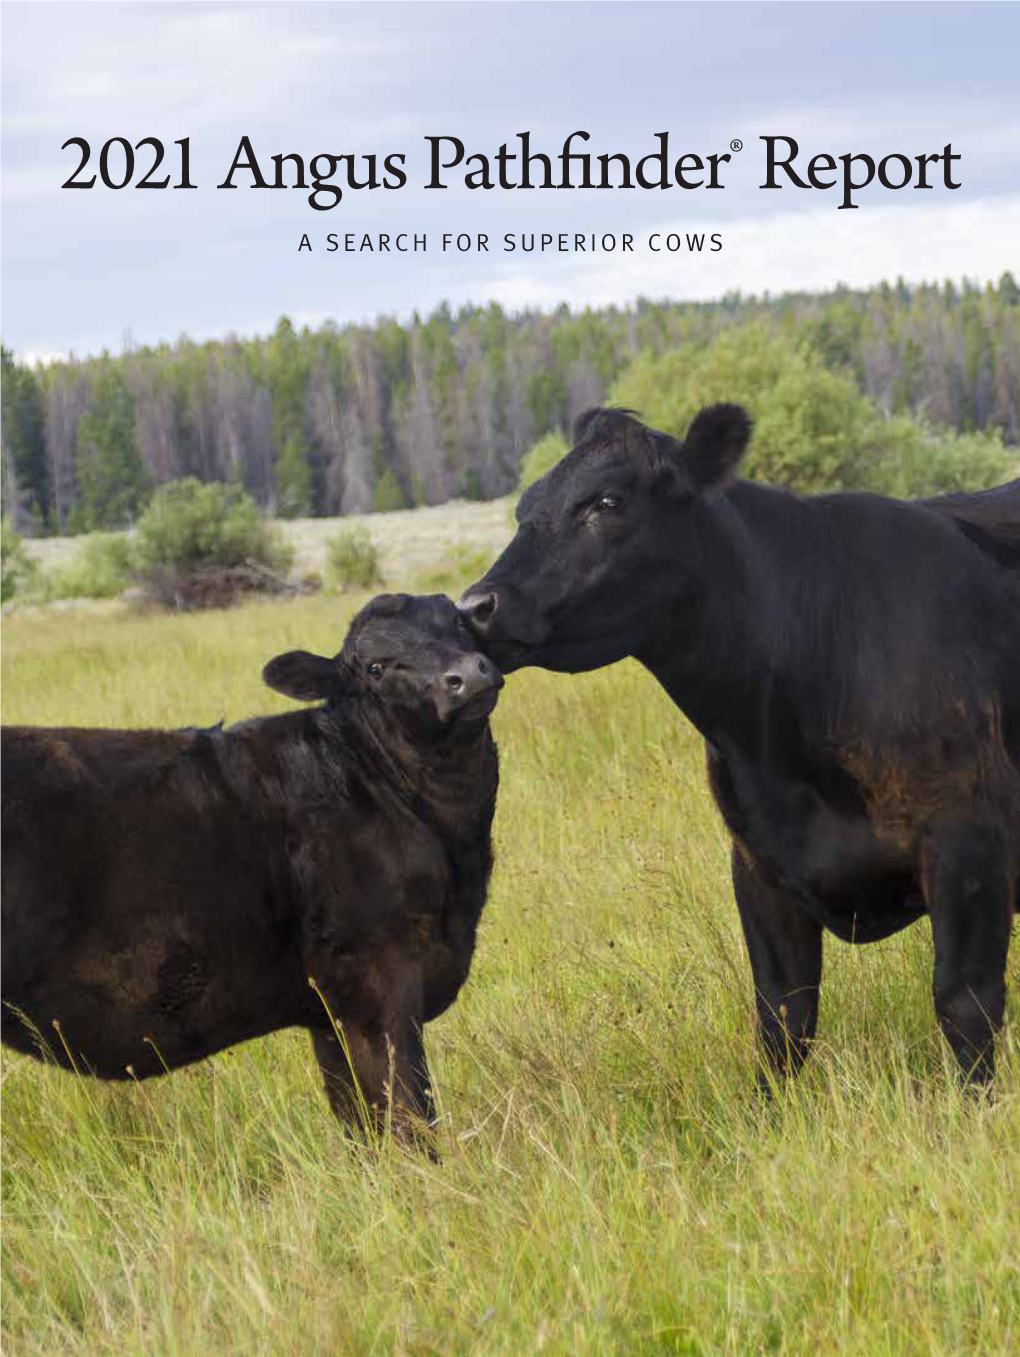 2021 Angus Pathfinder® Report a SEARCH for SUPERIOR COWS 2021 Angus Pathfinder® Report a SEARCH for SUPERIOR COWS